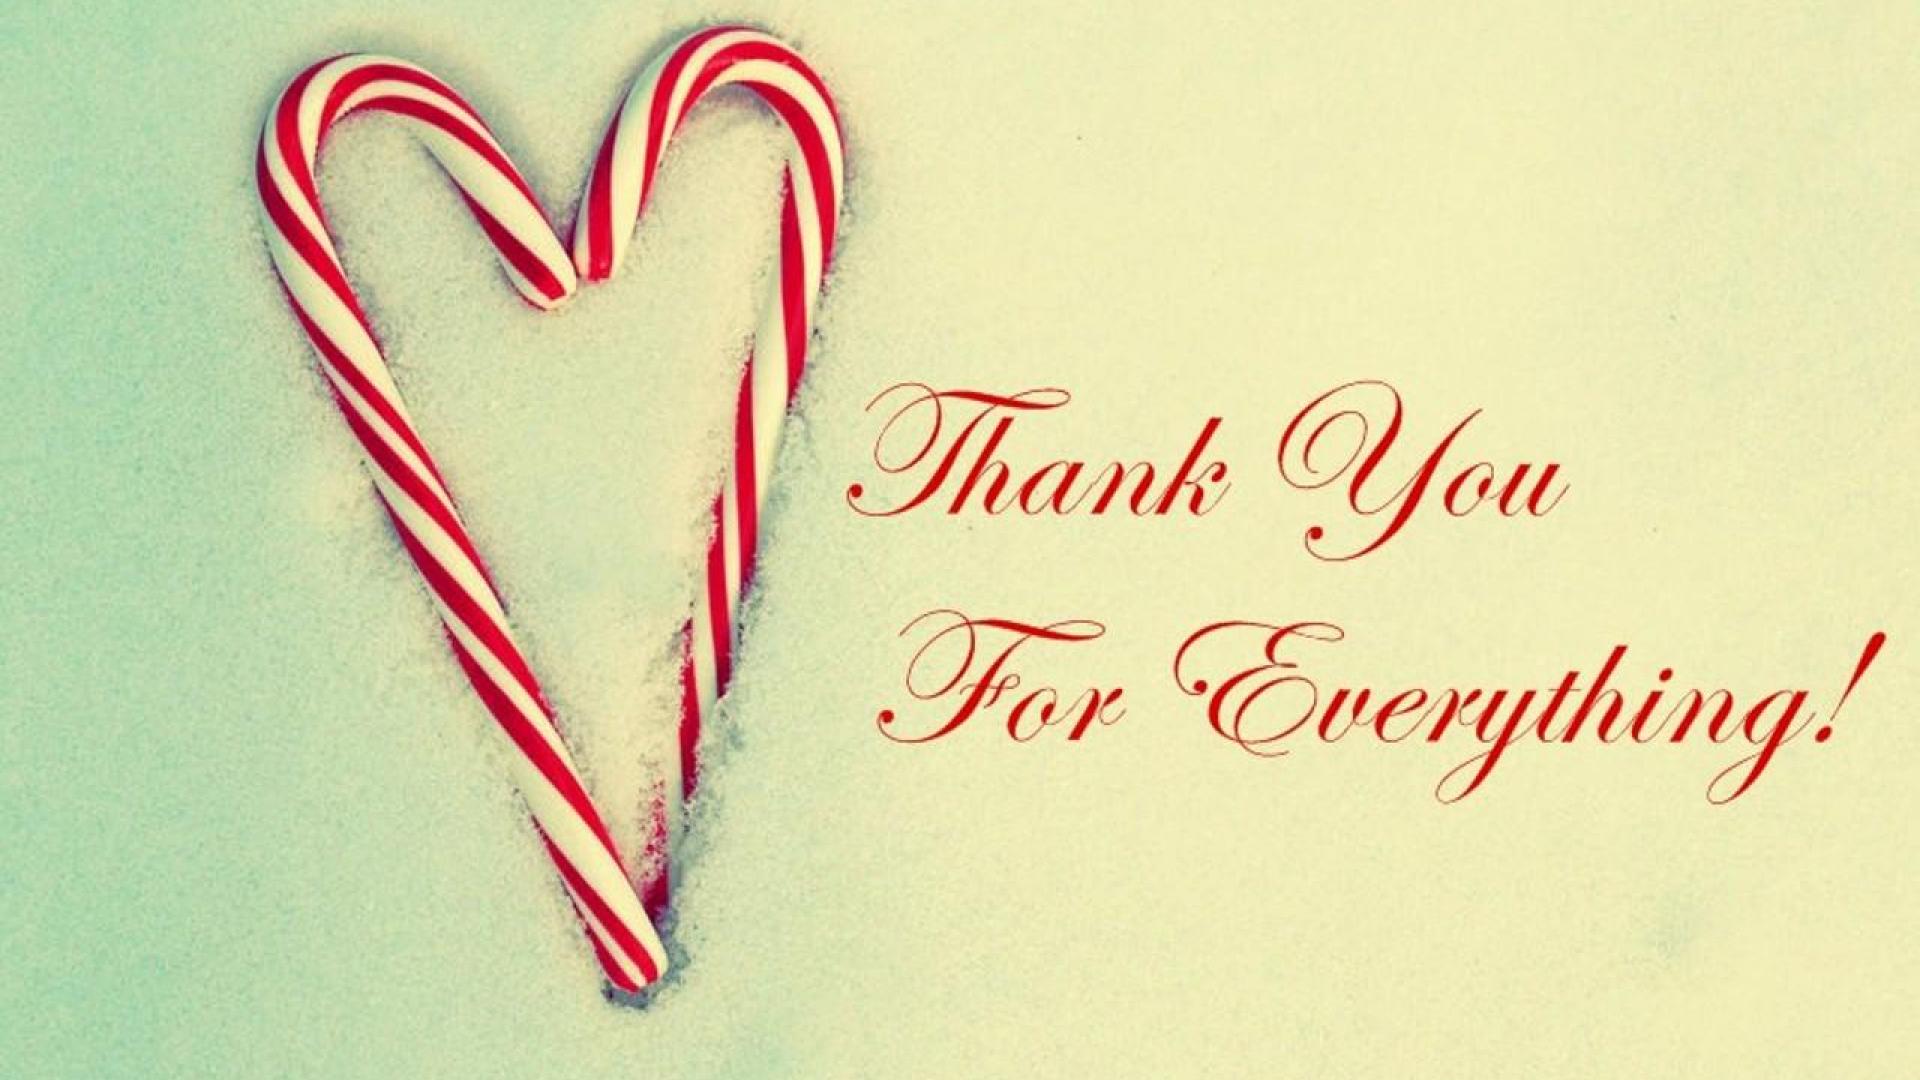 Thank-You-For-Everything-heart-images-hd-pics-free.jpg